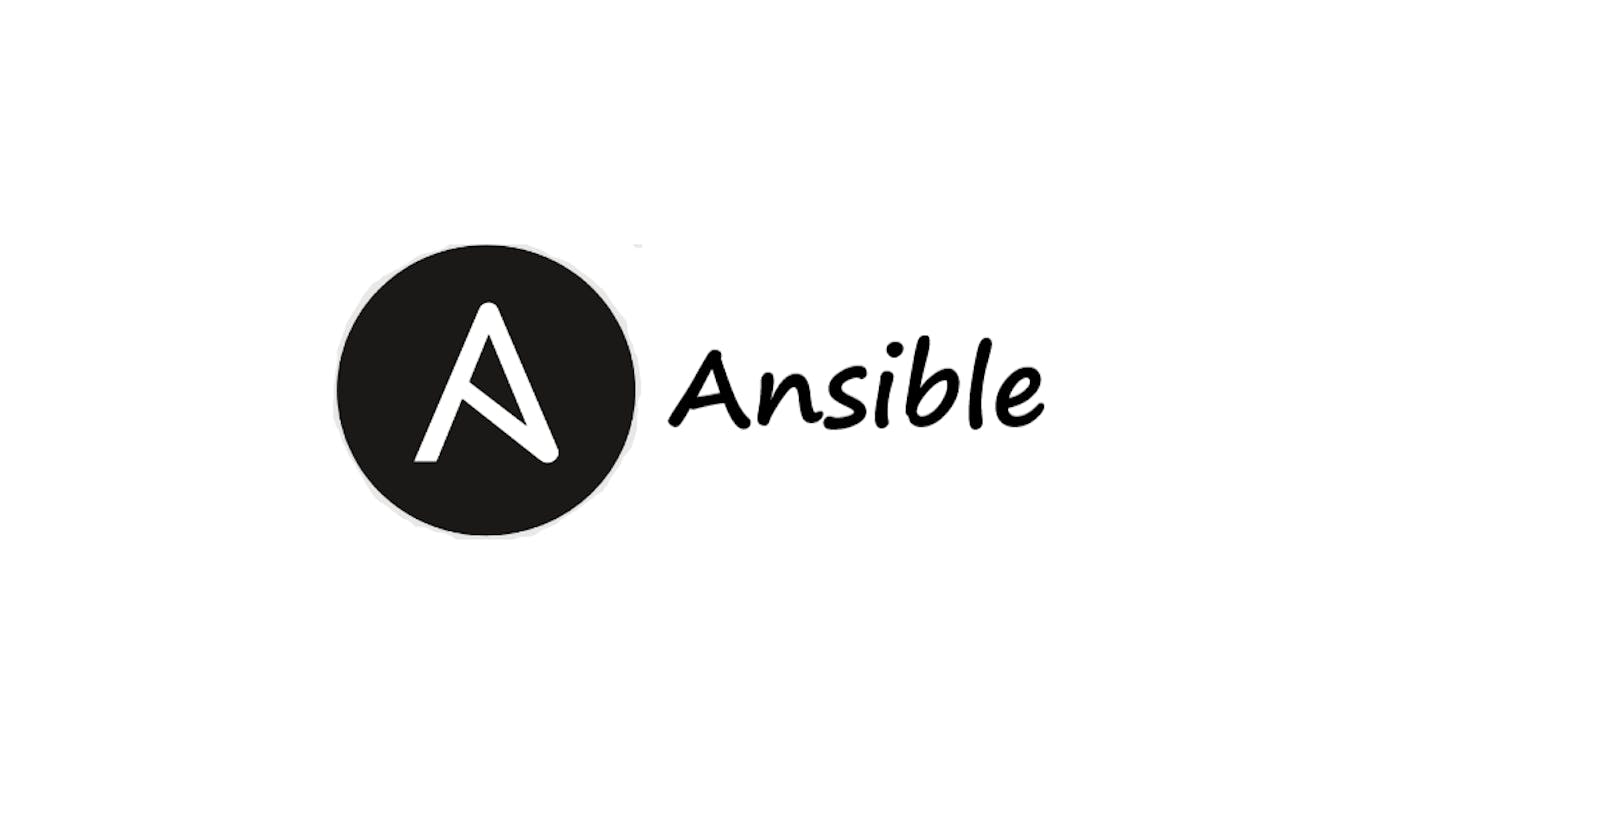 Why & What is Ansible - Ansible